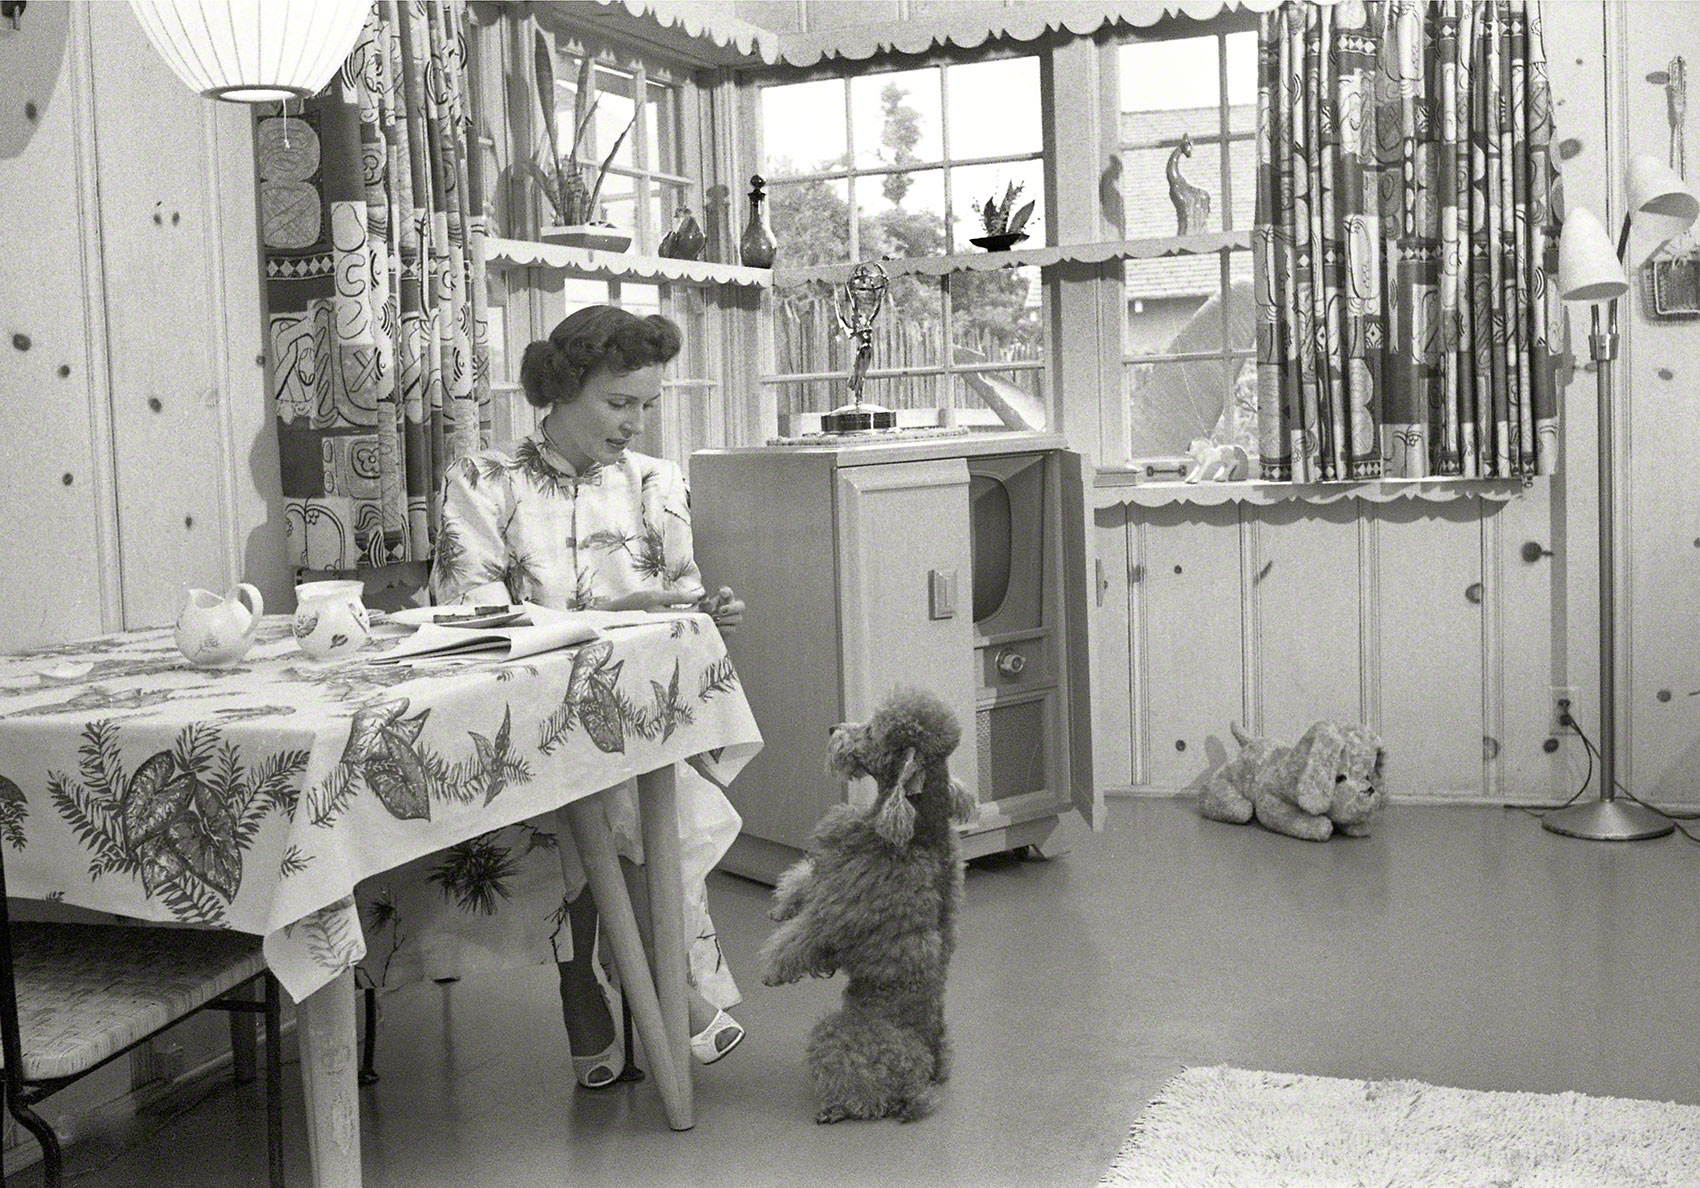 Actress Betty White at home with her dog, Los Angeles circa 1952